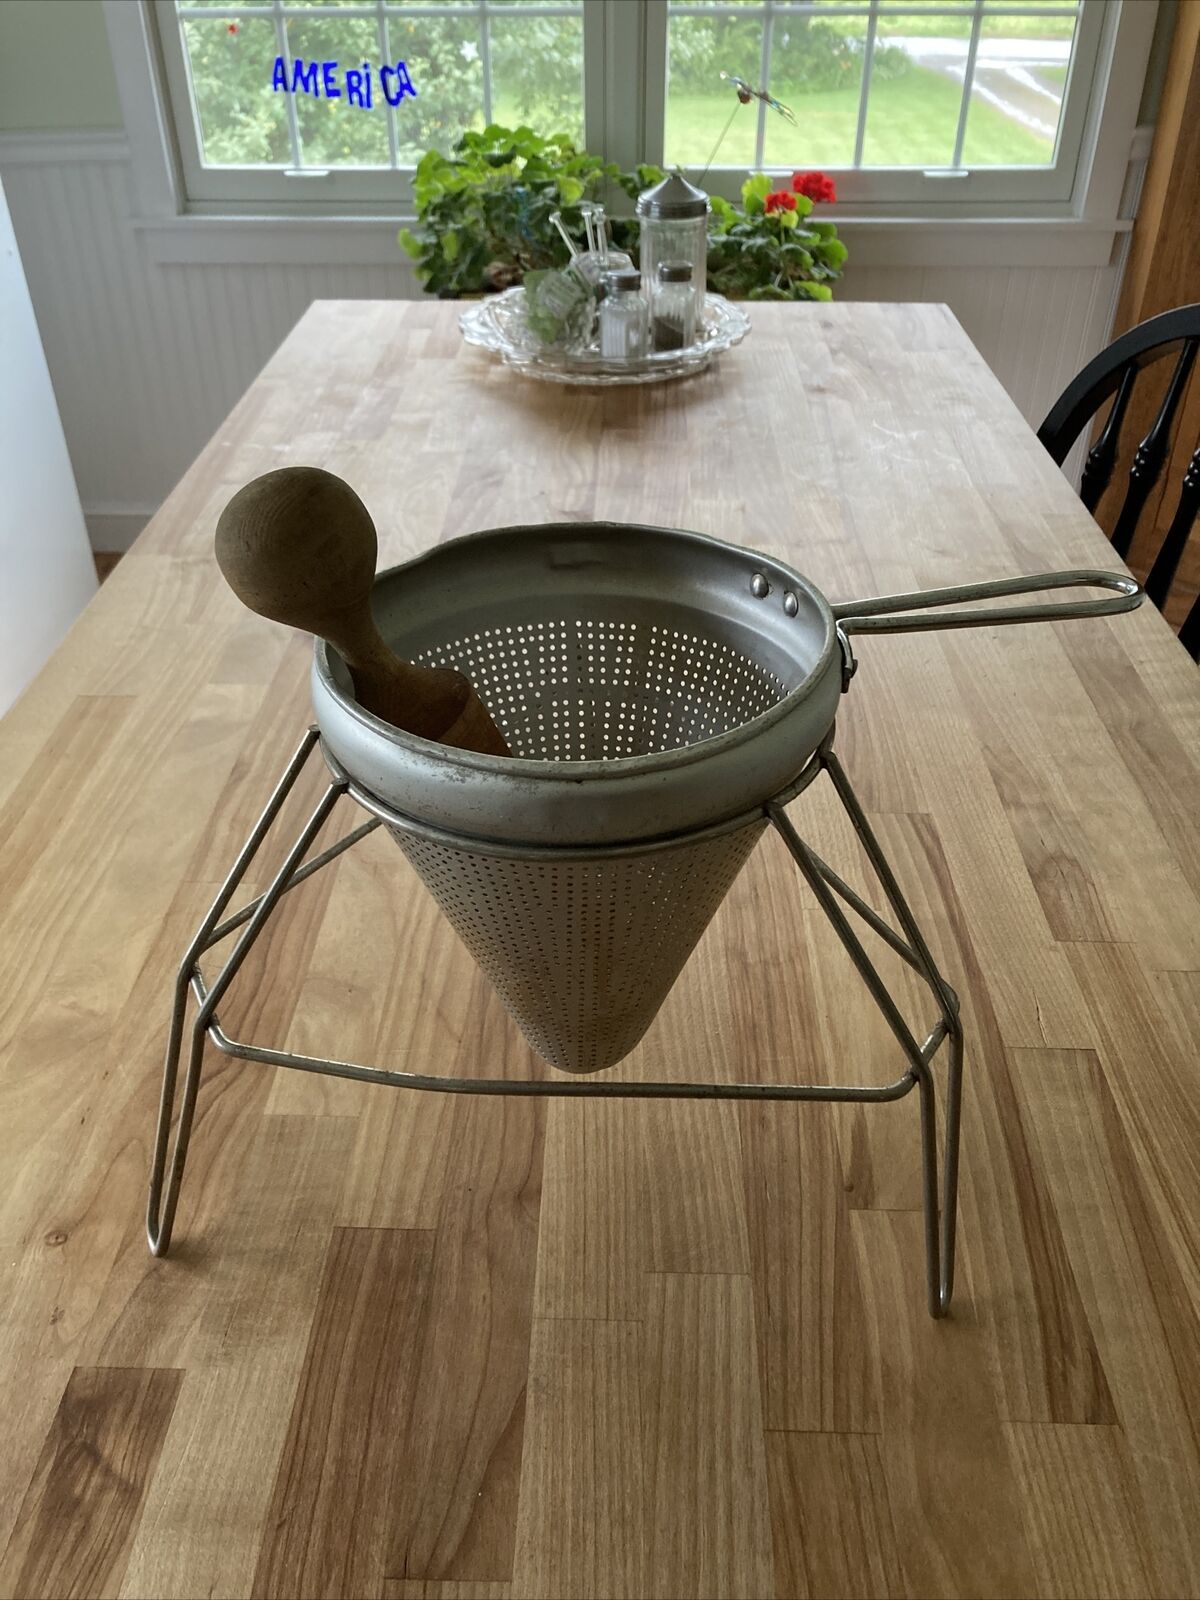 Antique Aluminum Cone Sieve Strainer Colander With Wood Pestle And Stand